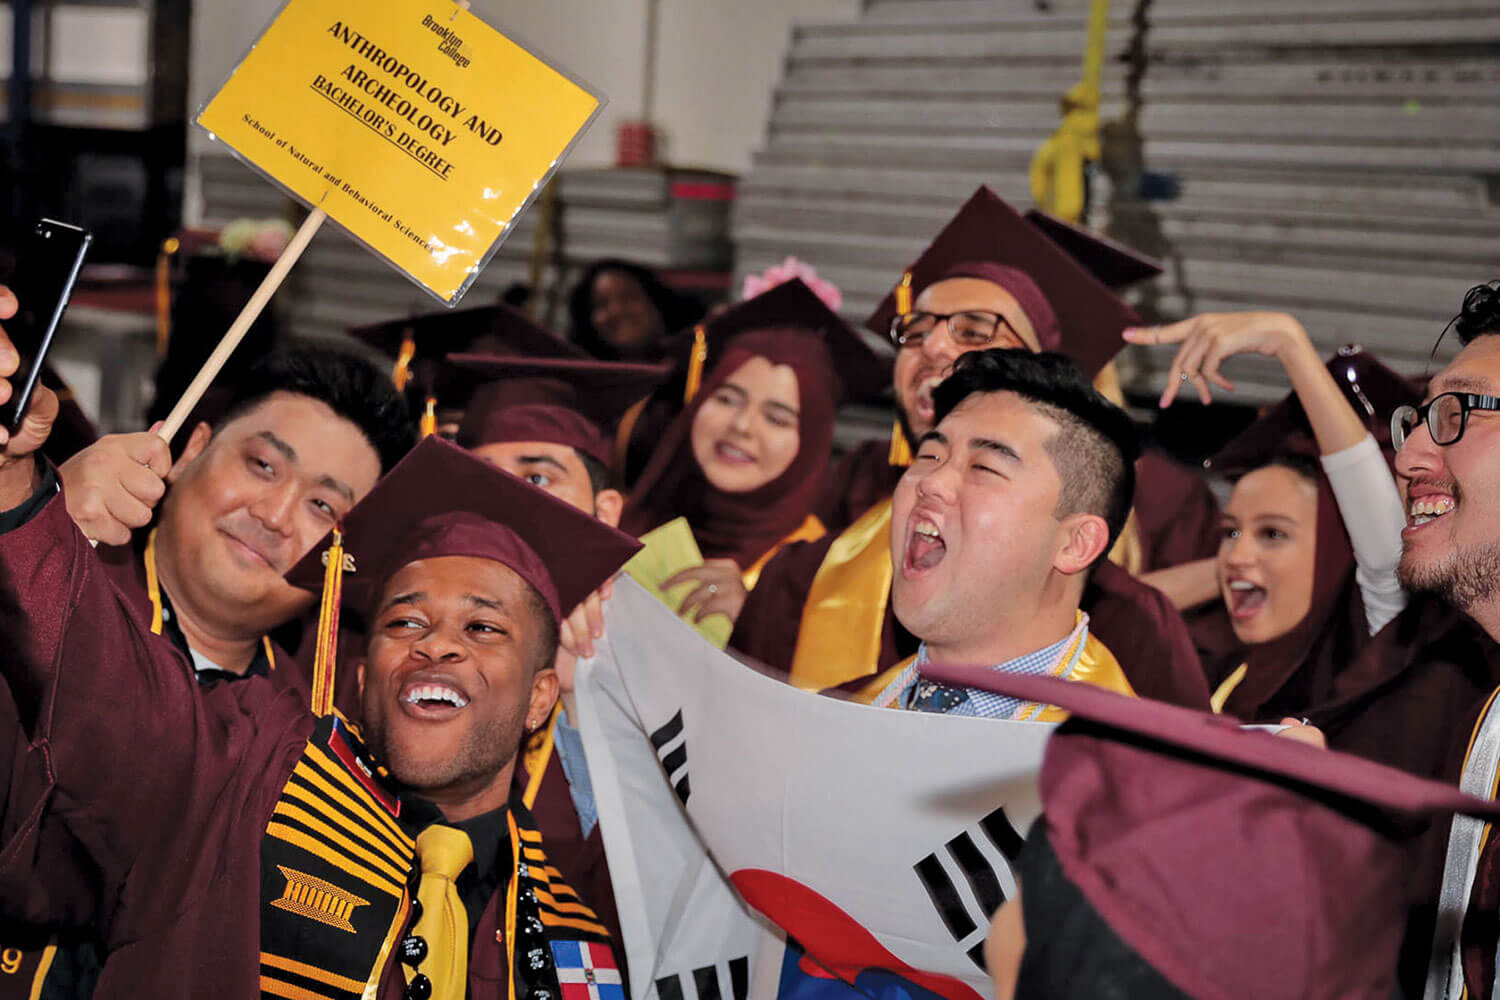 2019 Commencement Ceremony, May 30, 2019. Students celebrate their new status as graduates.